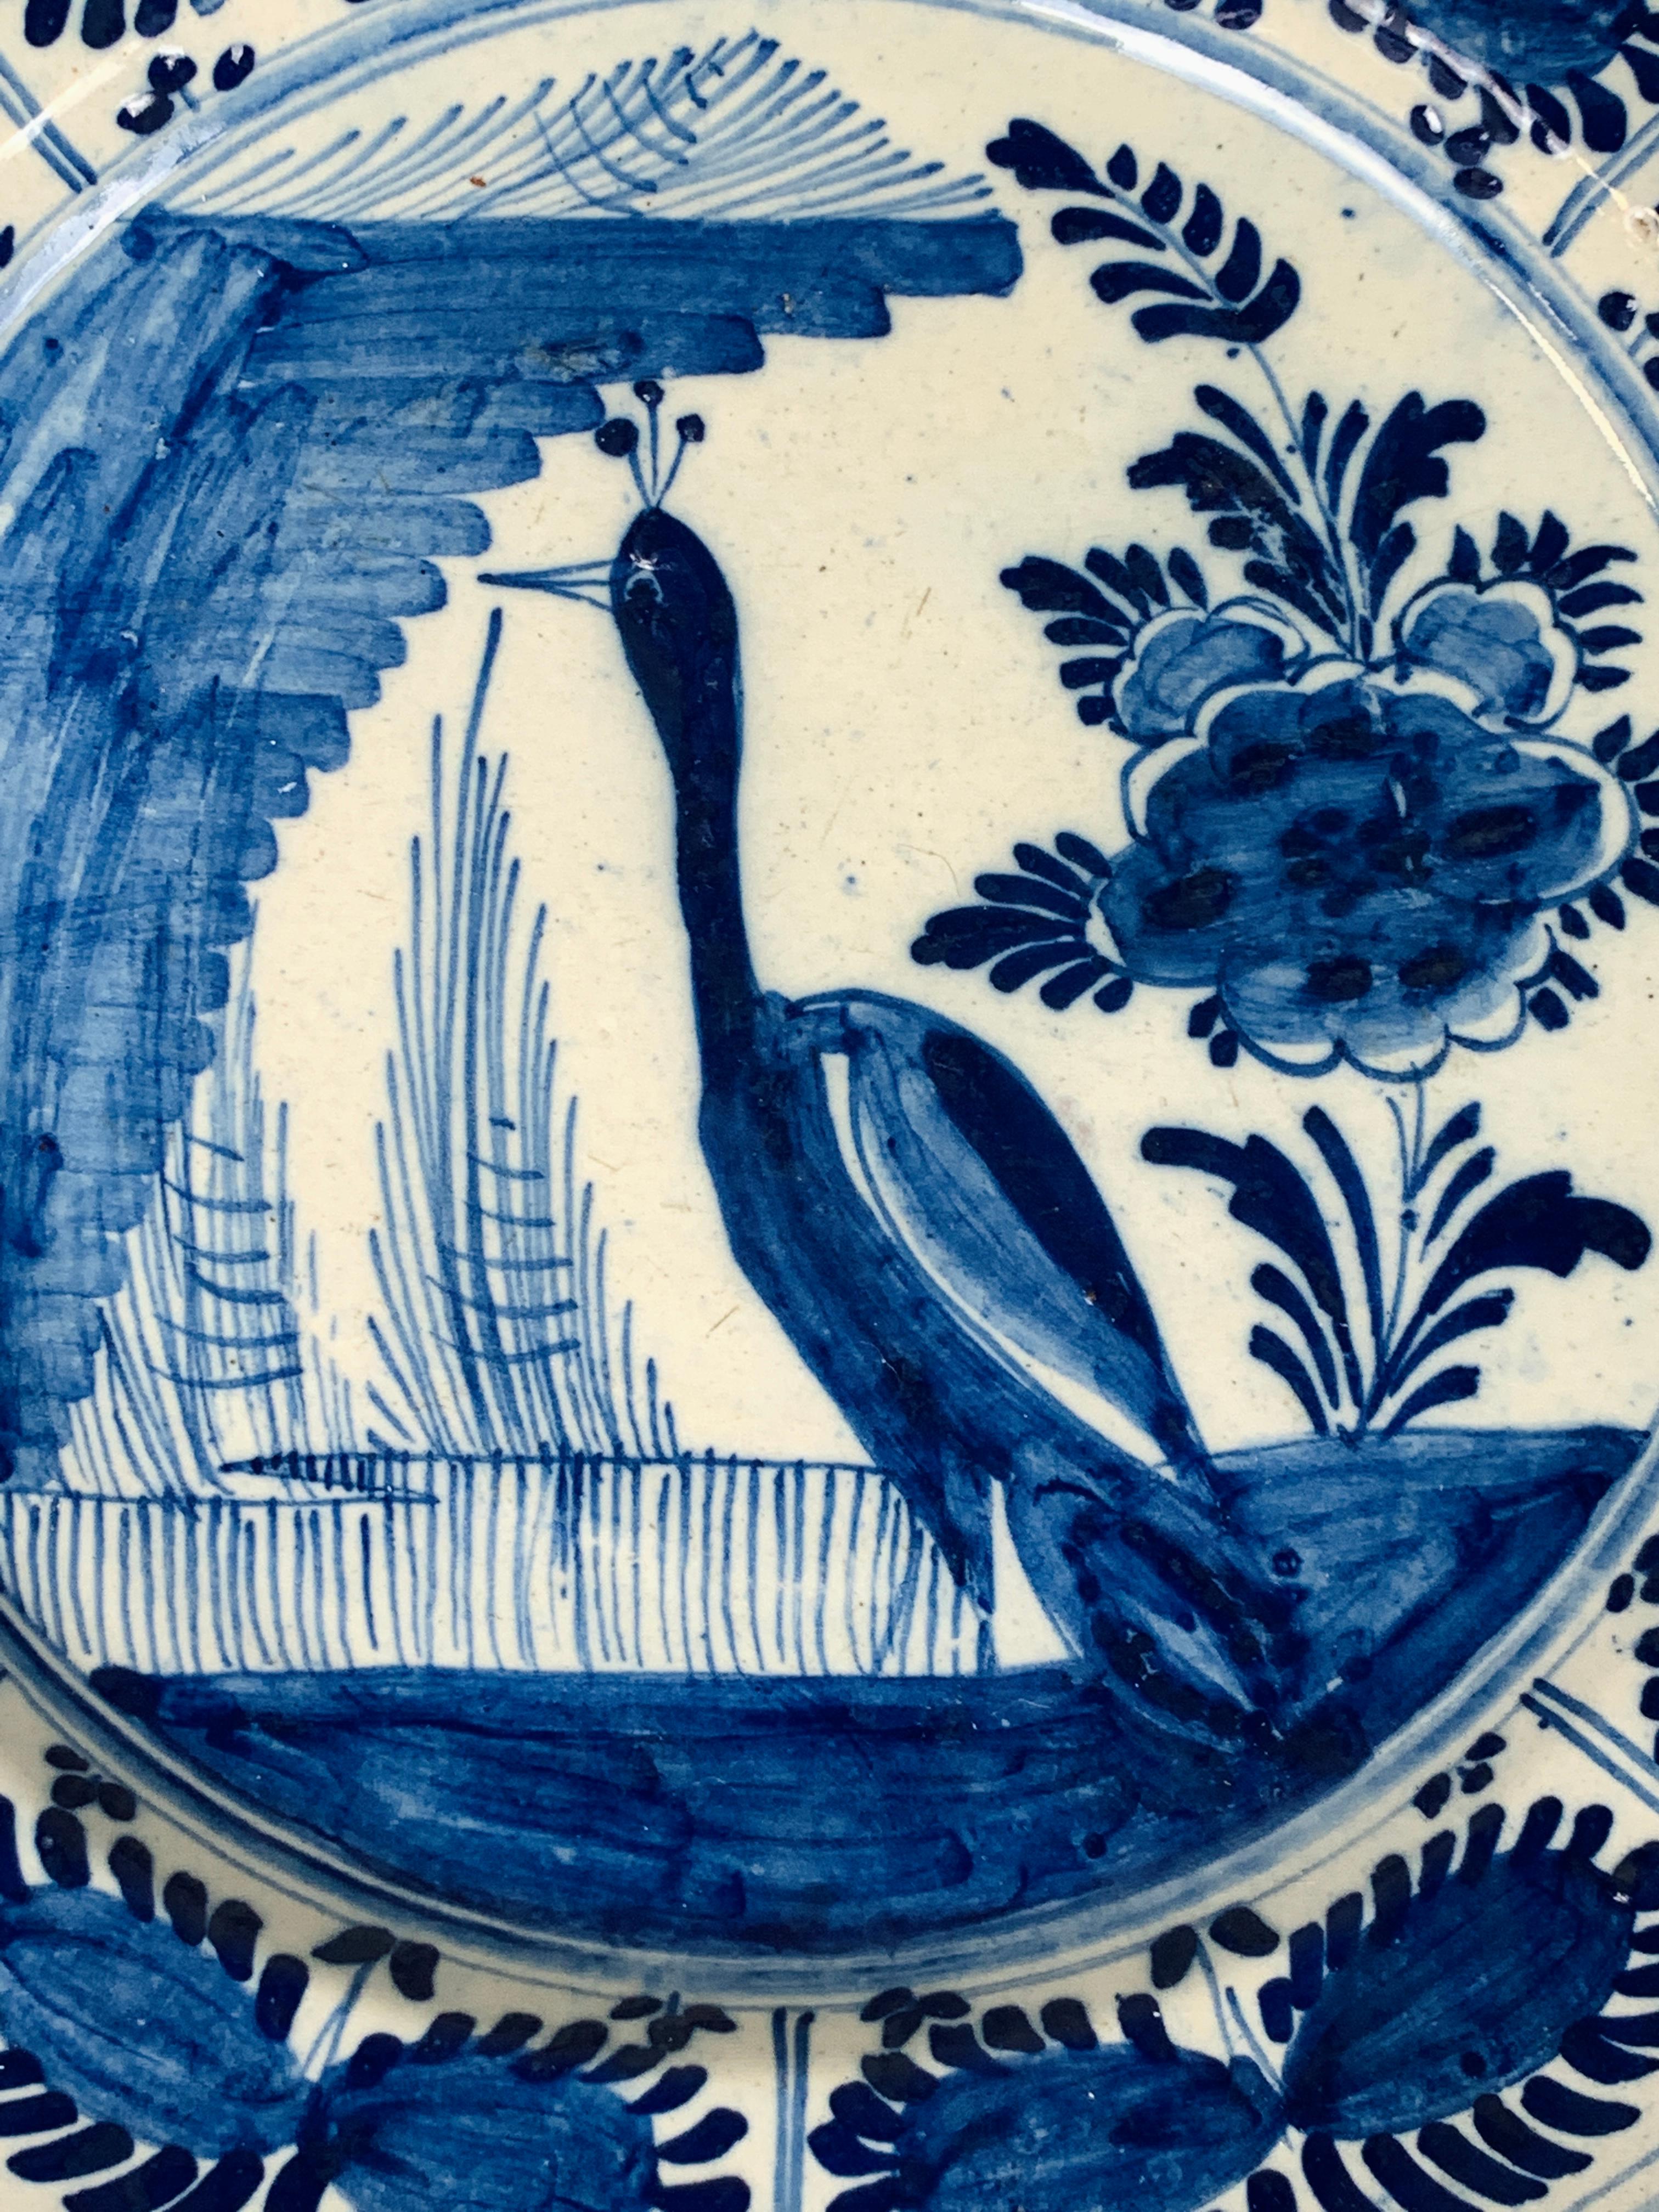 This blue and white delft charger is hand-painted in cobalt blue. We see a peacock standing at the edge of a pond, and next to it is an oversized peony. But, it is the majestic bird that captures our eye.
Dimensions: 12.25